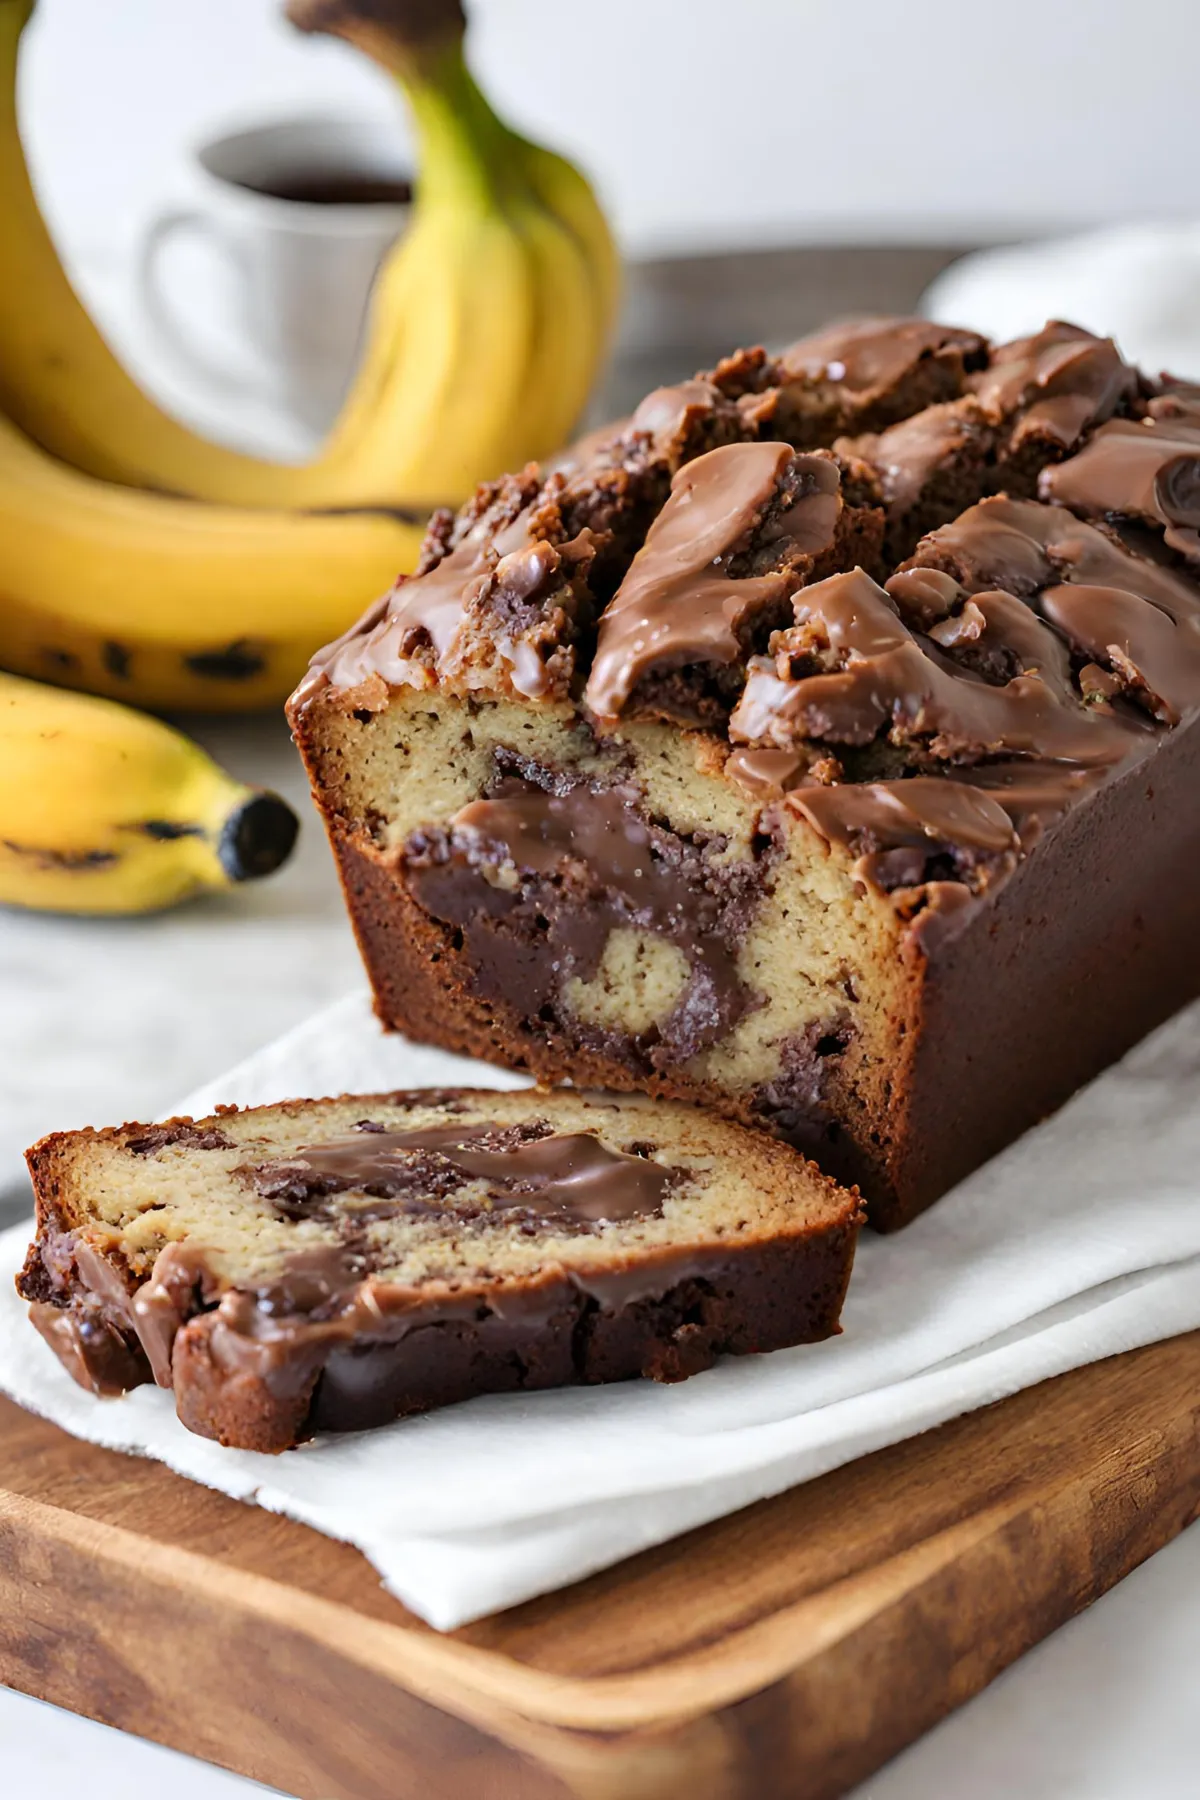 Advanced Tips and Serving Suggestions for Chocolate Marbled Banana Bread